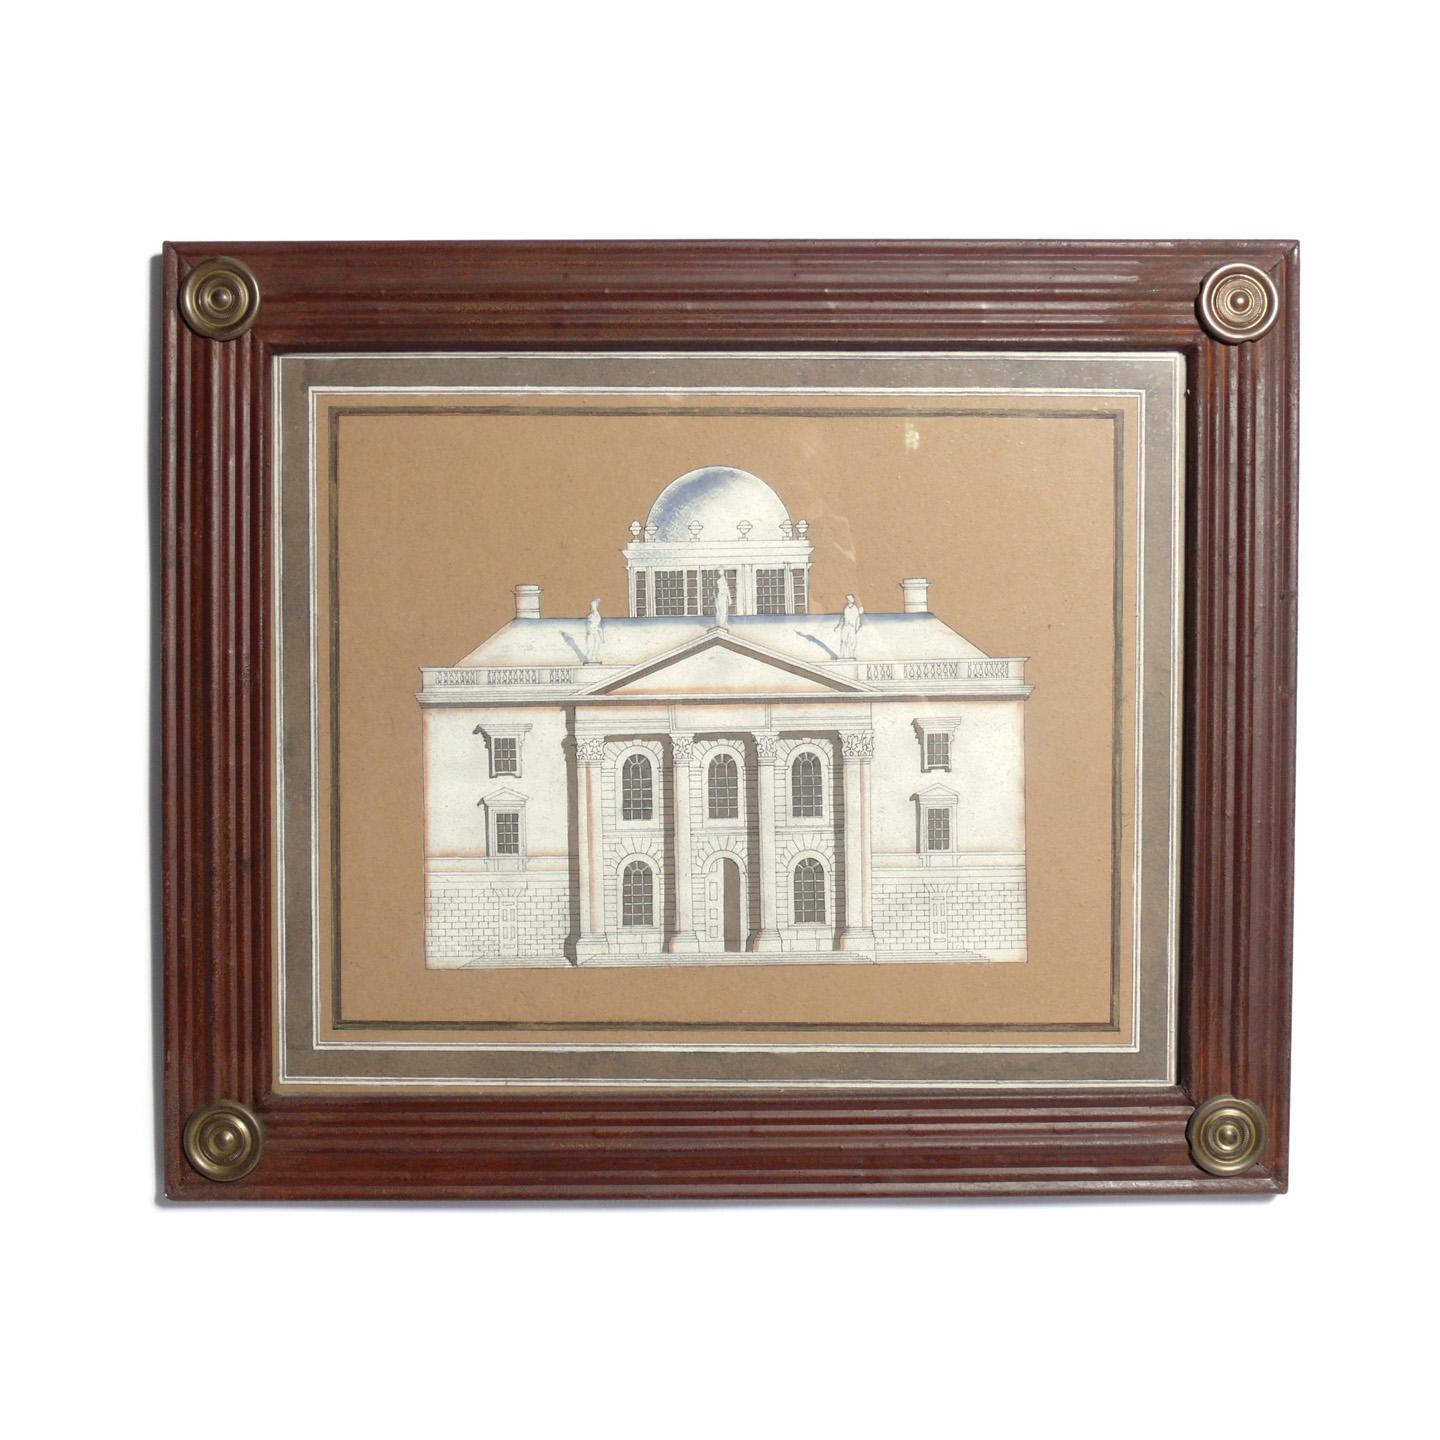 Set of hand colored or painted neoclassical architectural drawings in custom metal frames, believed to be French, circa 1940s, for legendary NYC antique dealer and interior designer John Rosselli. Signed with John Rosselli tag on verso. They are